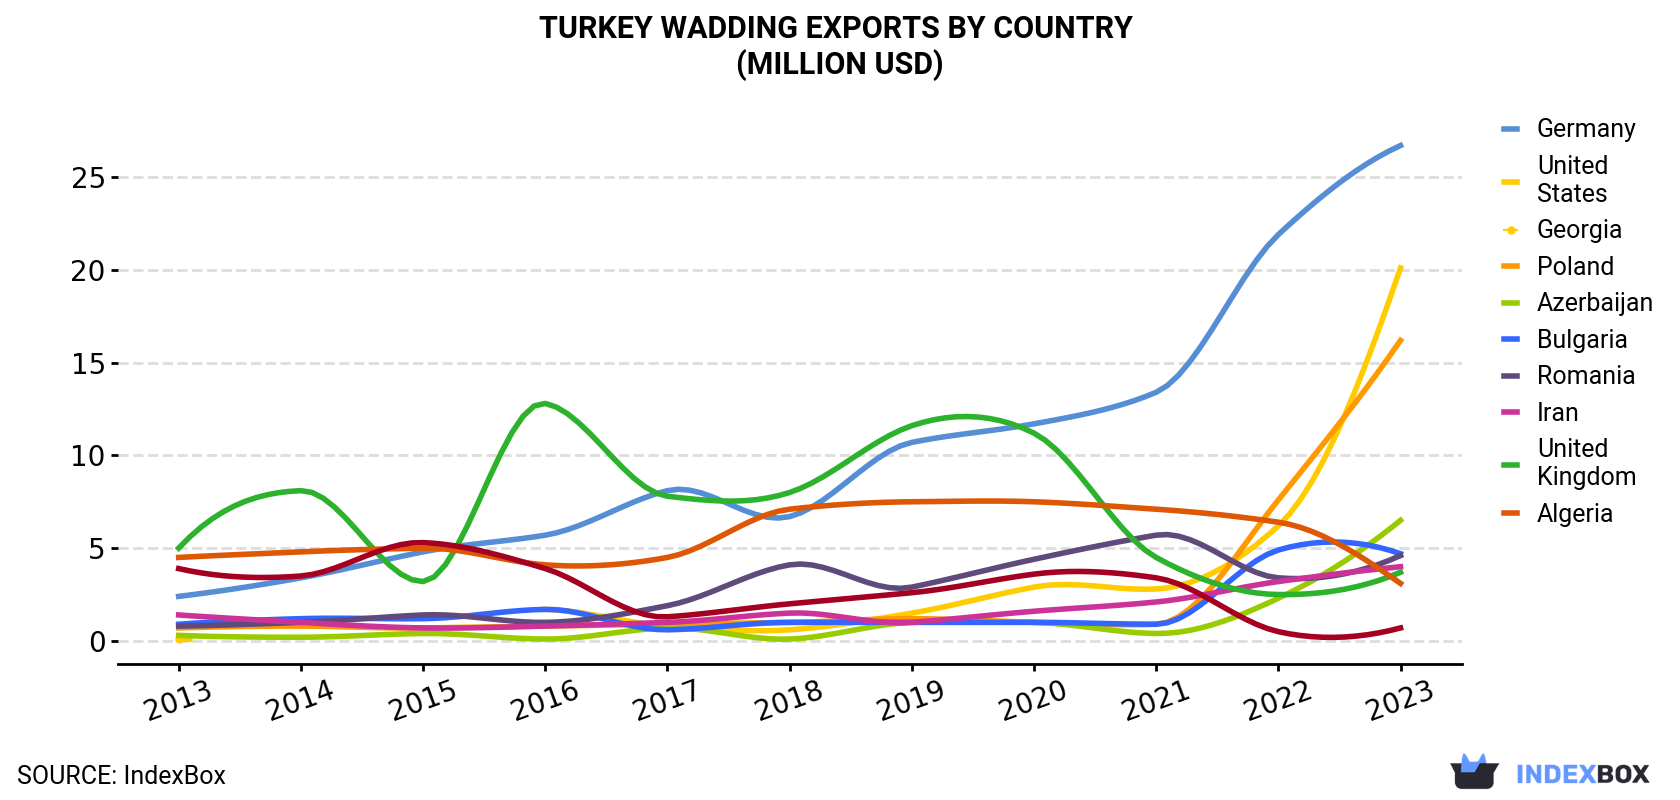 Turkey Wadding Exports By Country (Million USD)